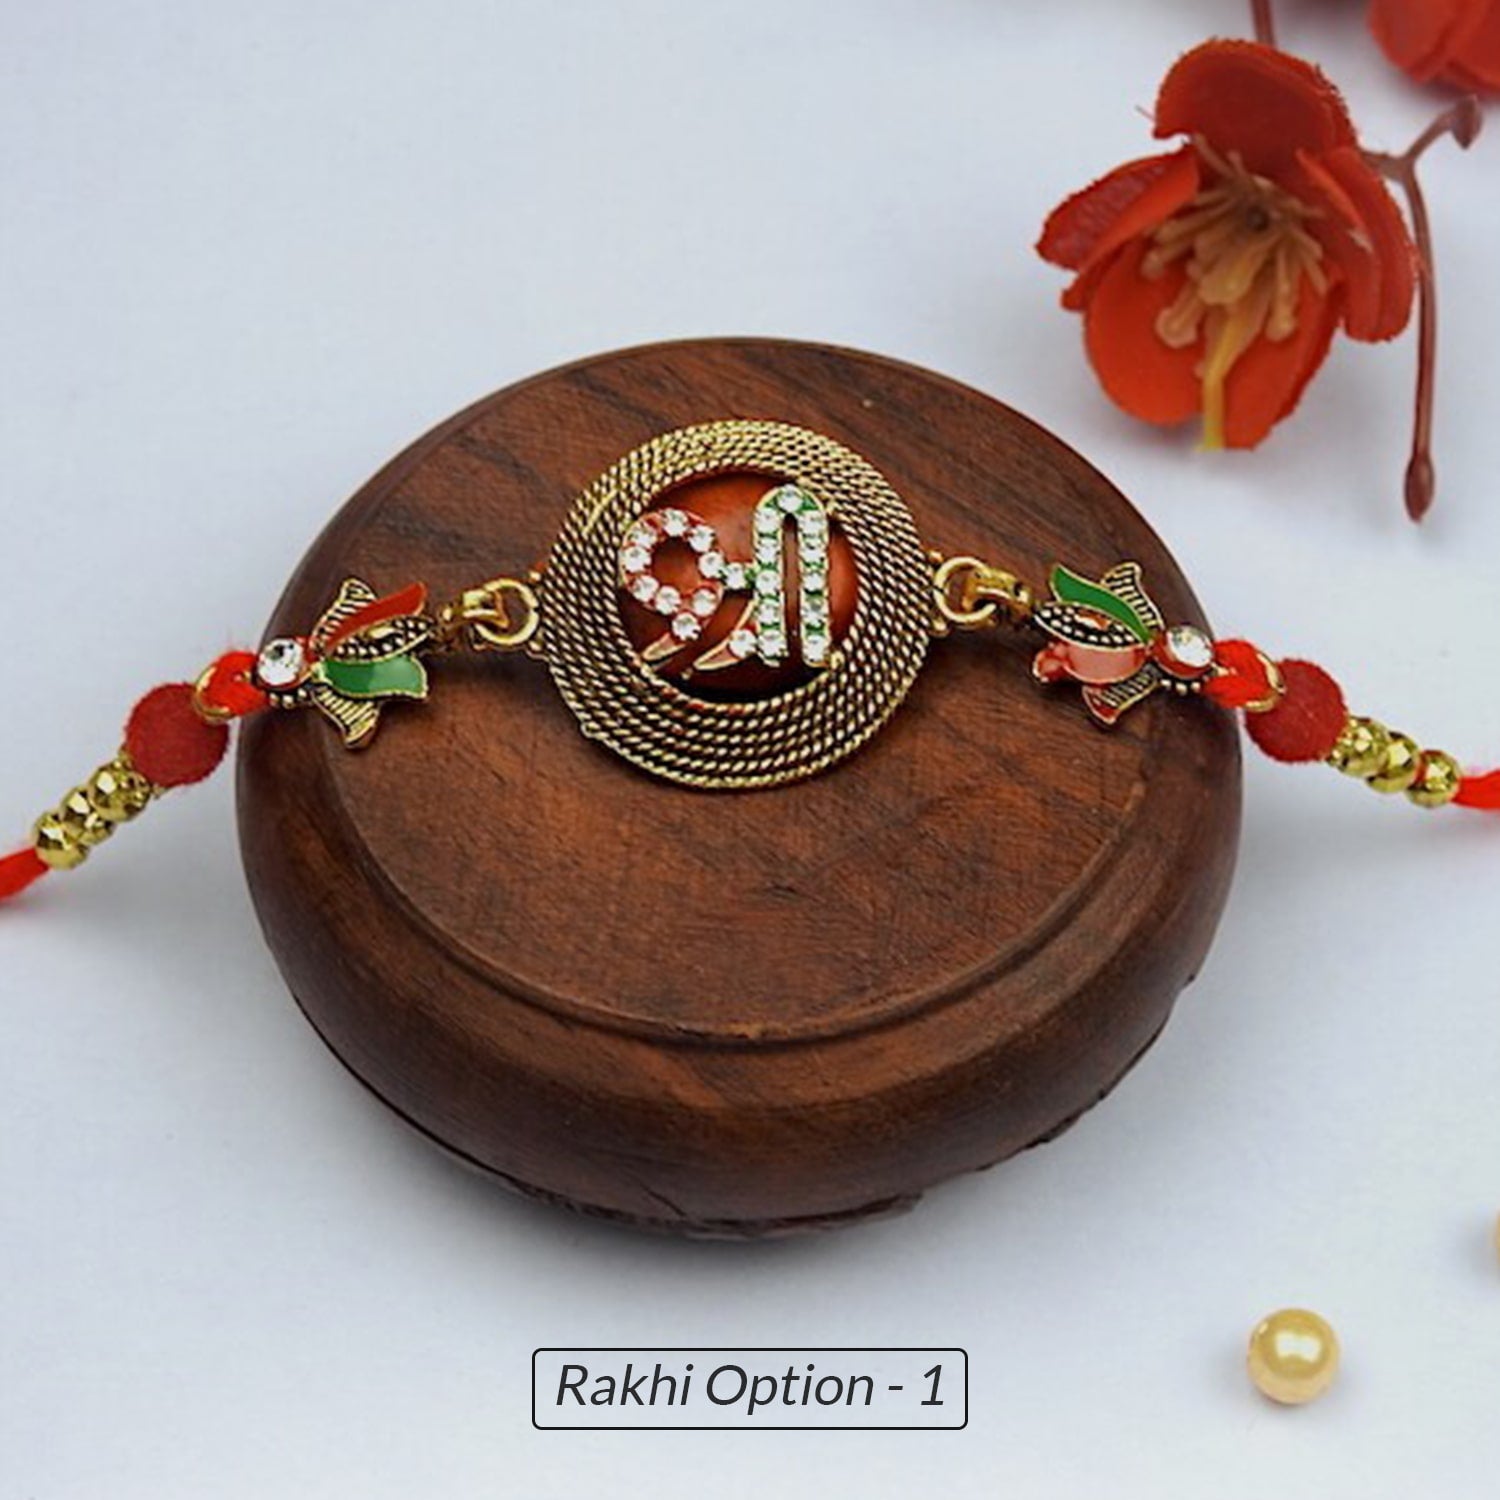 Glorious Rakhis With Laddus And Dry Fruits